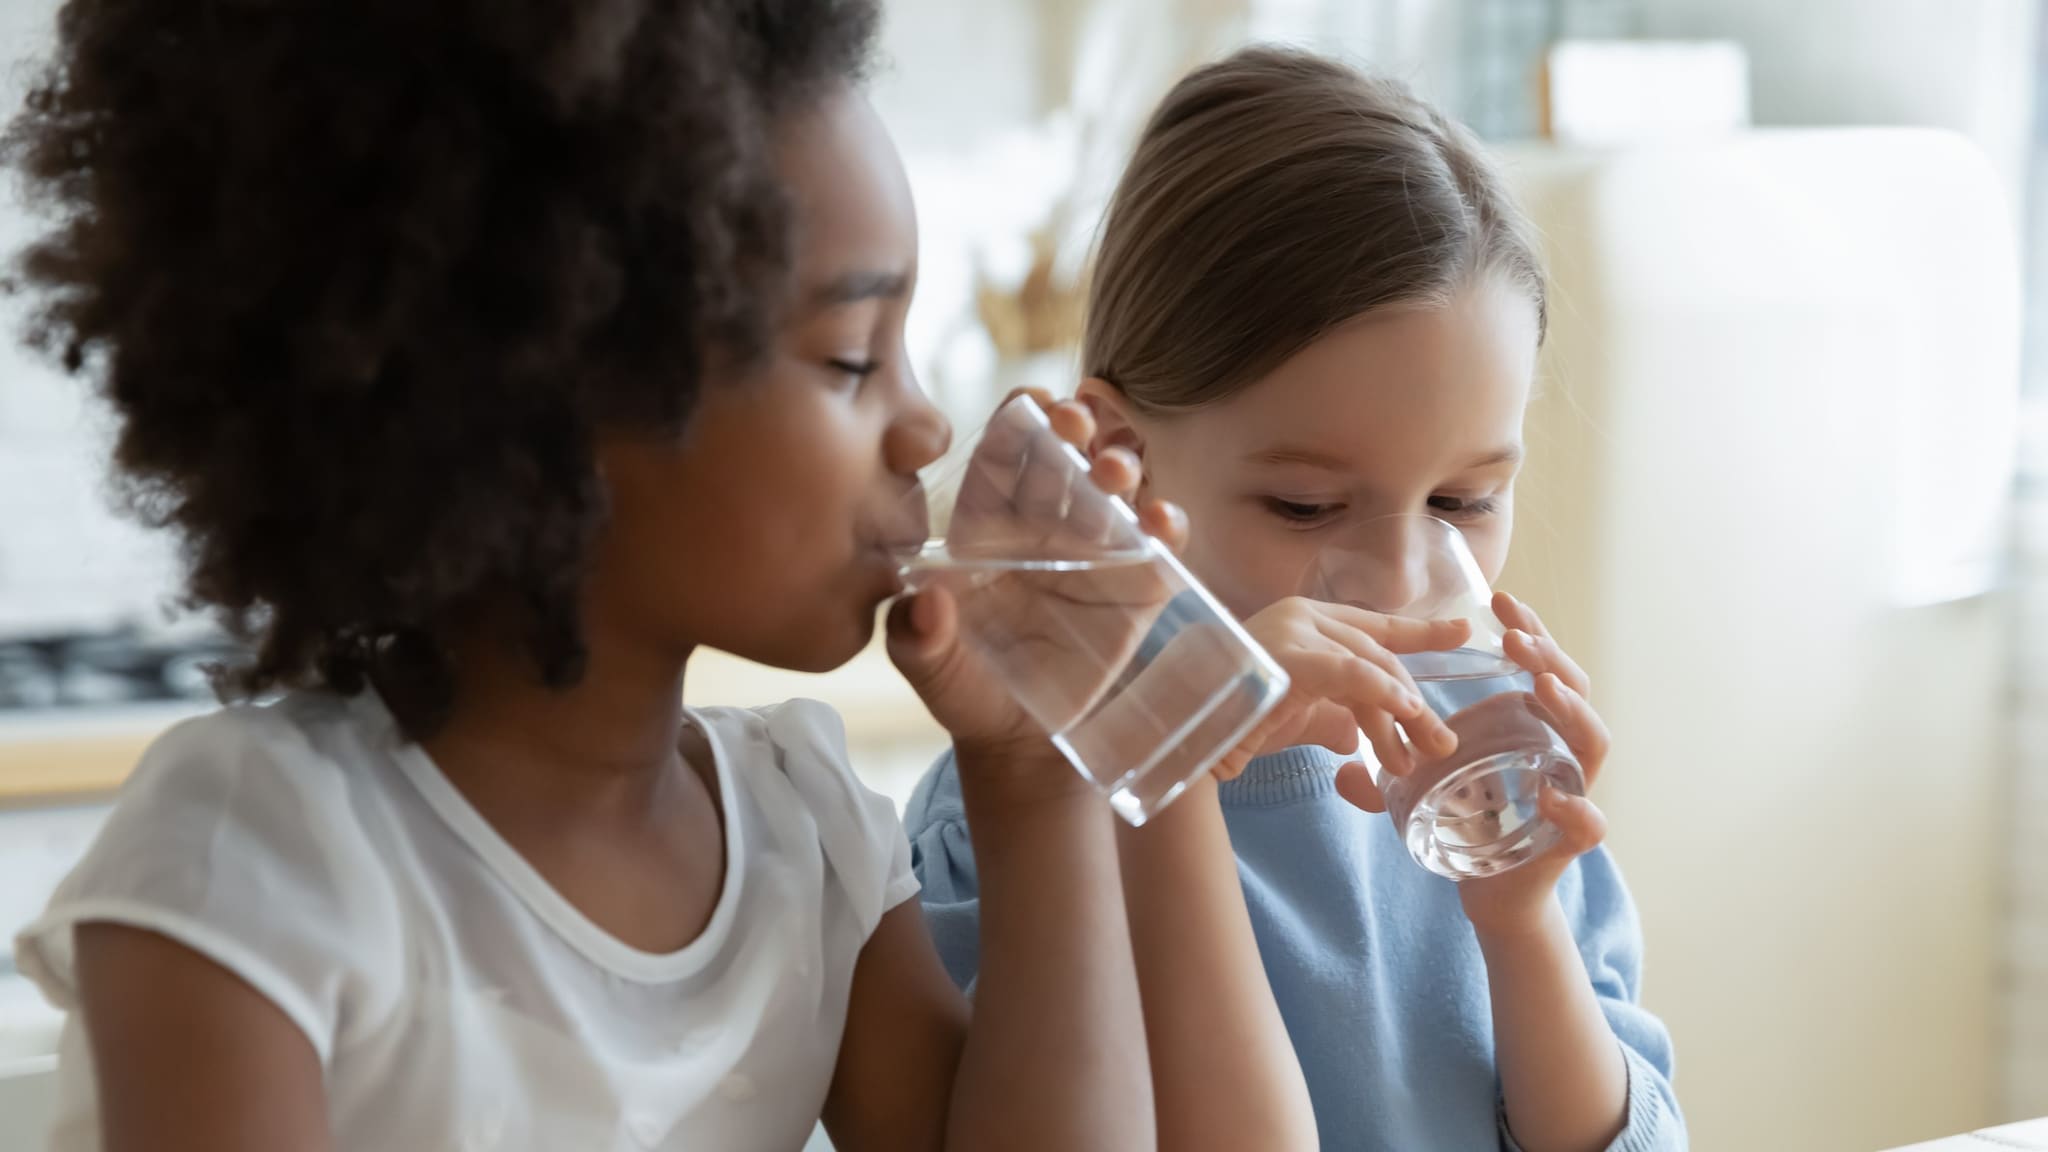 Two children drinking glasses of water next to each other indoors.